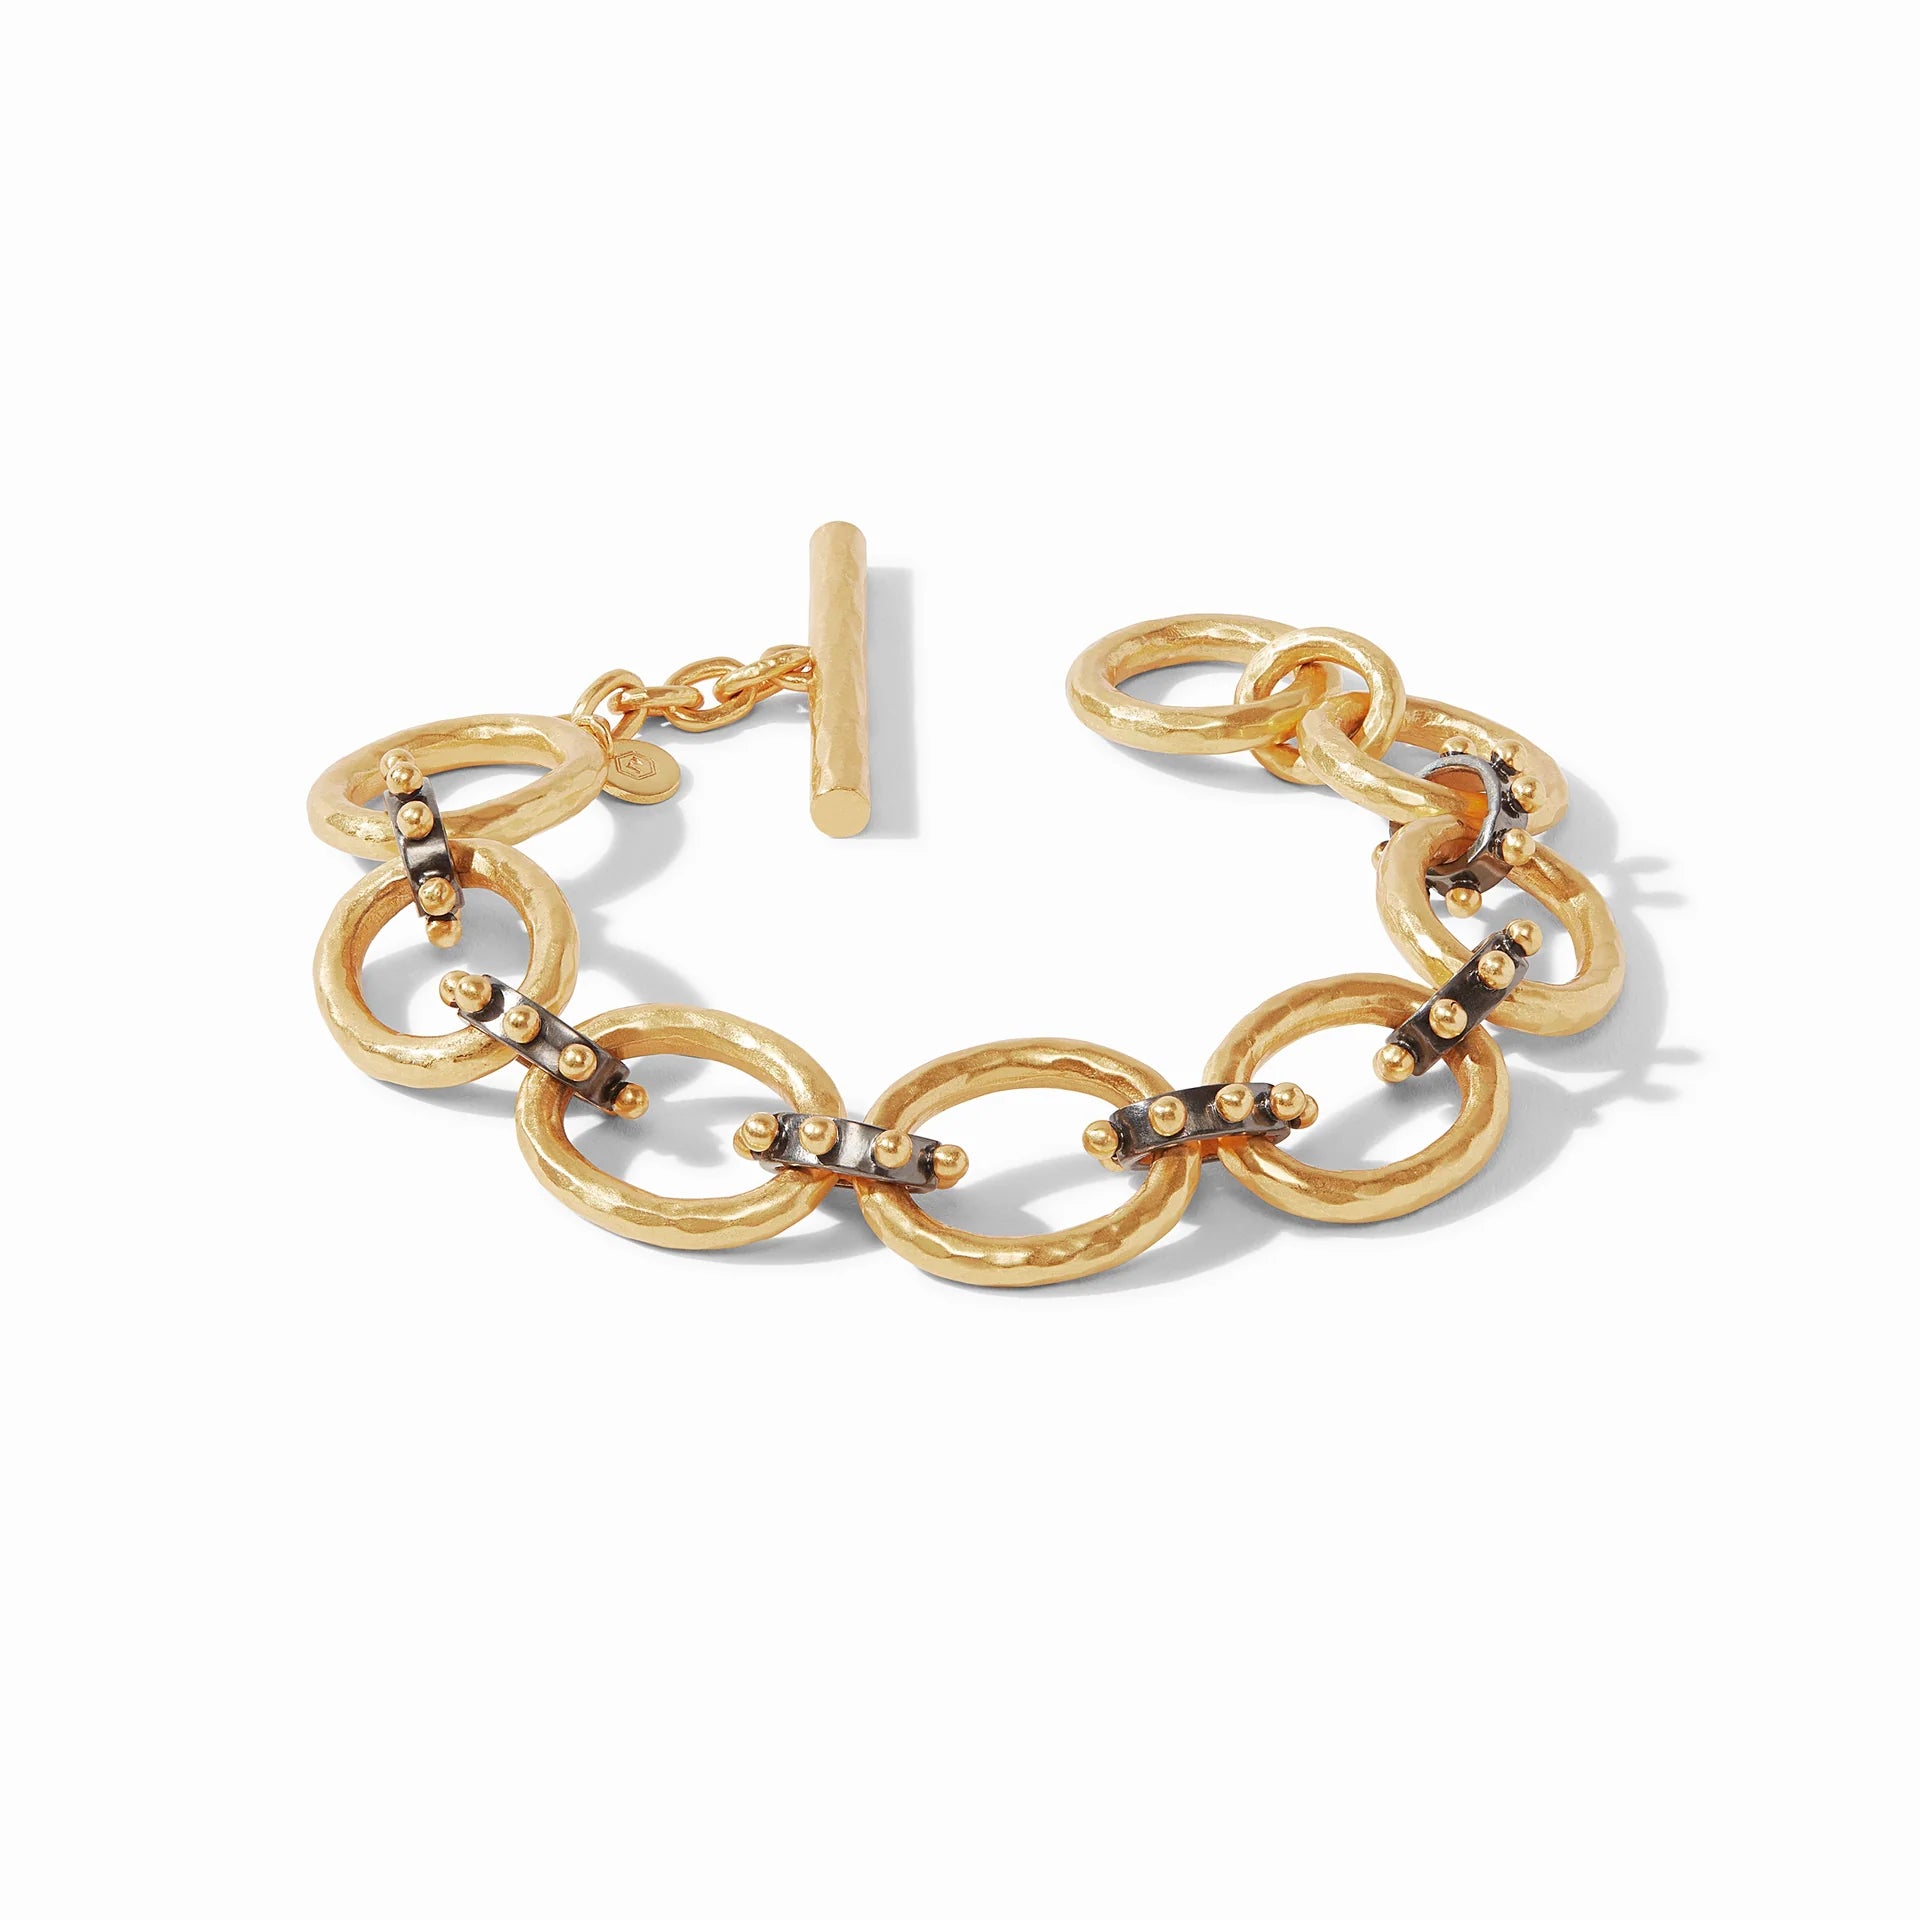 Gold chain link bracelet pictured on a white background. 